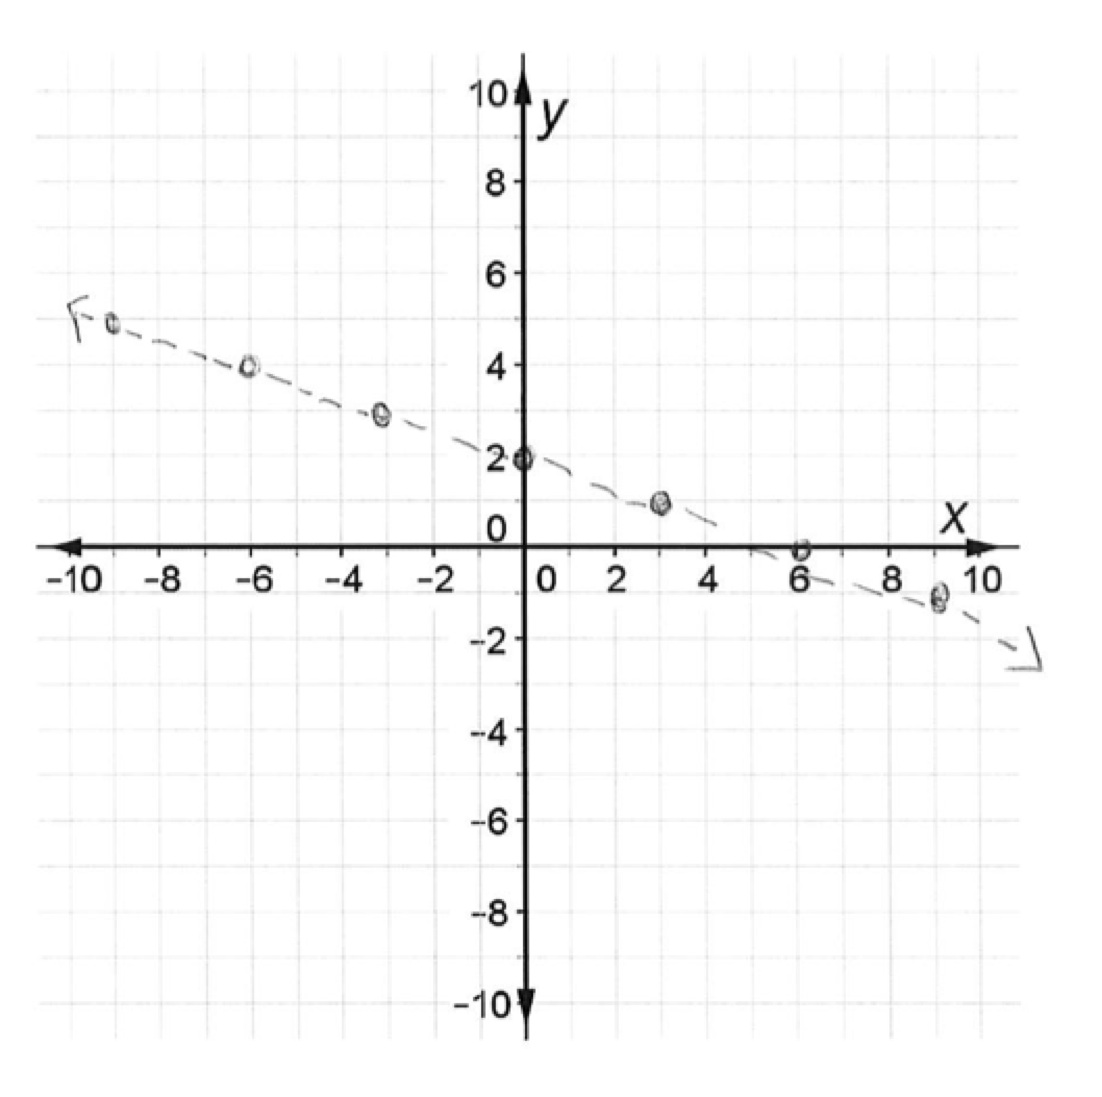 Graphing Linear Inequalities Students Are Asked To Graph A Strict Linear Inequality In The Coordi